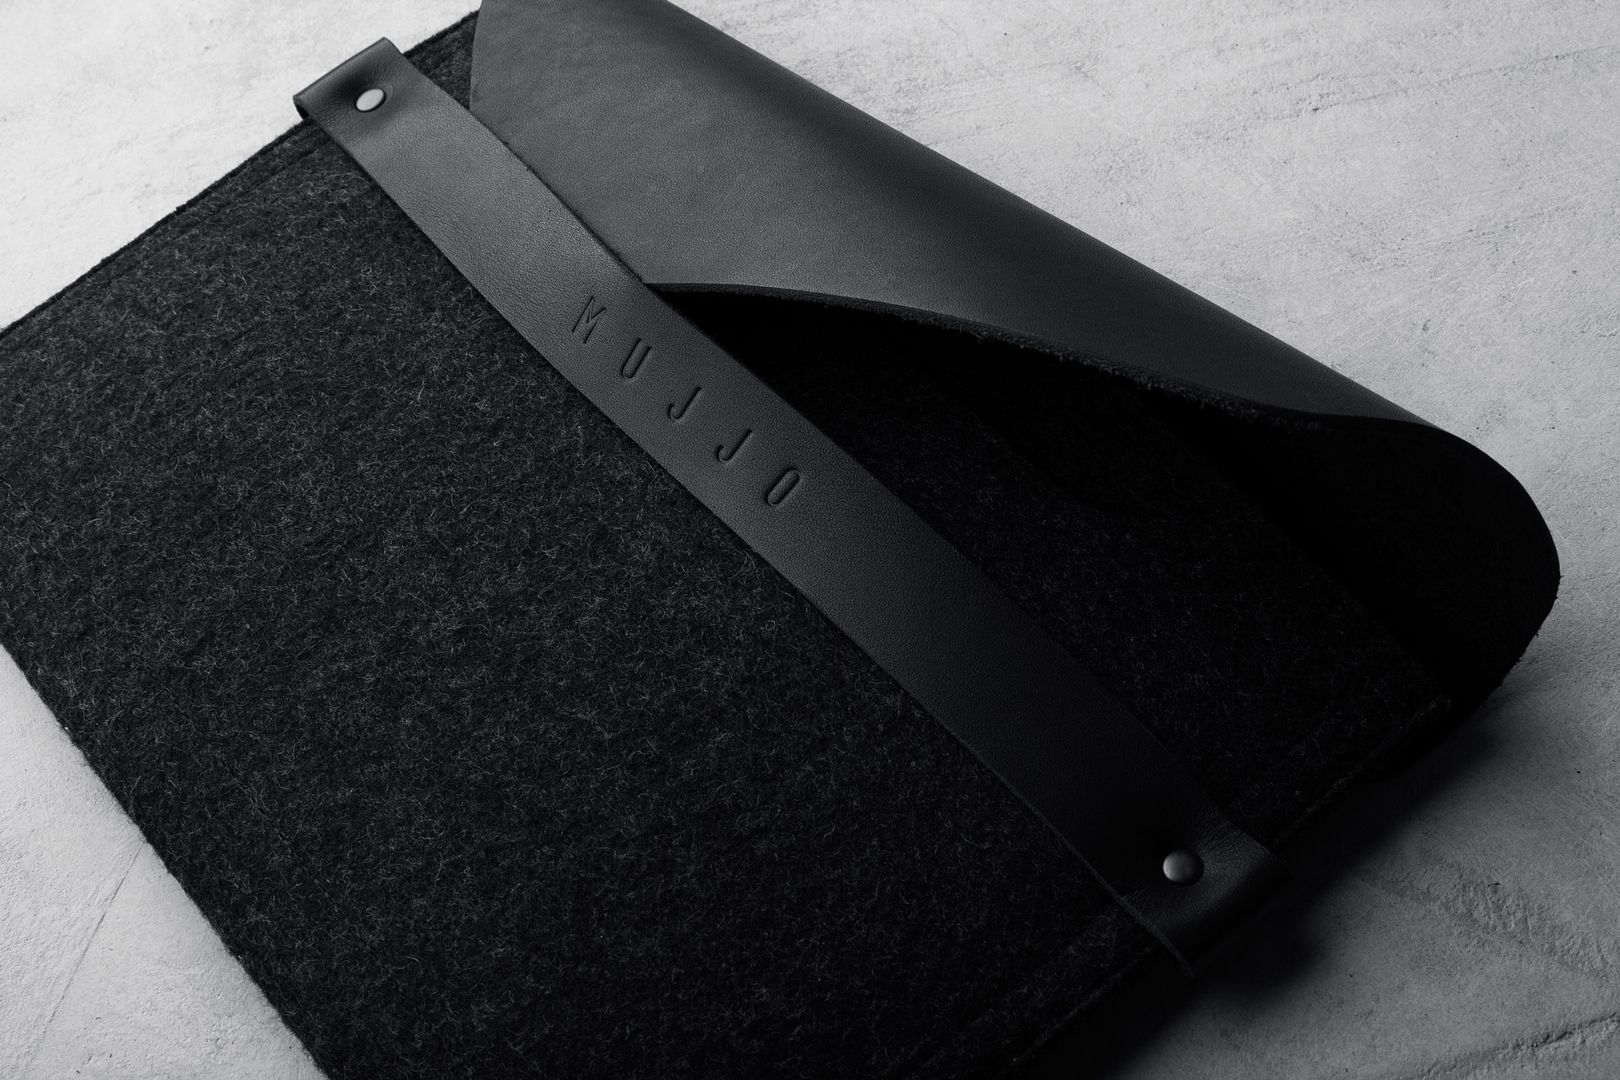 Mujjo black iPad Sleeve | Coolest tech accessories of the year